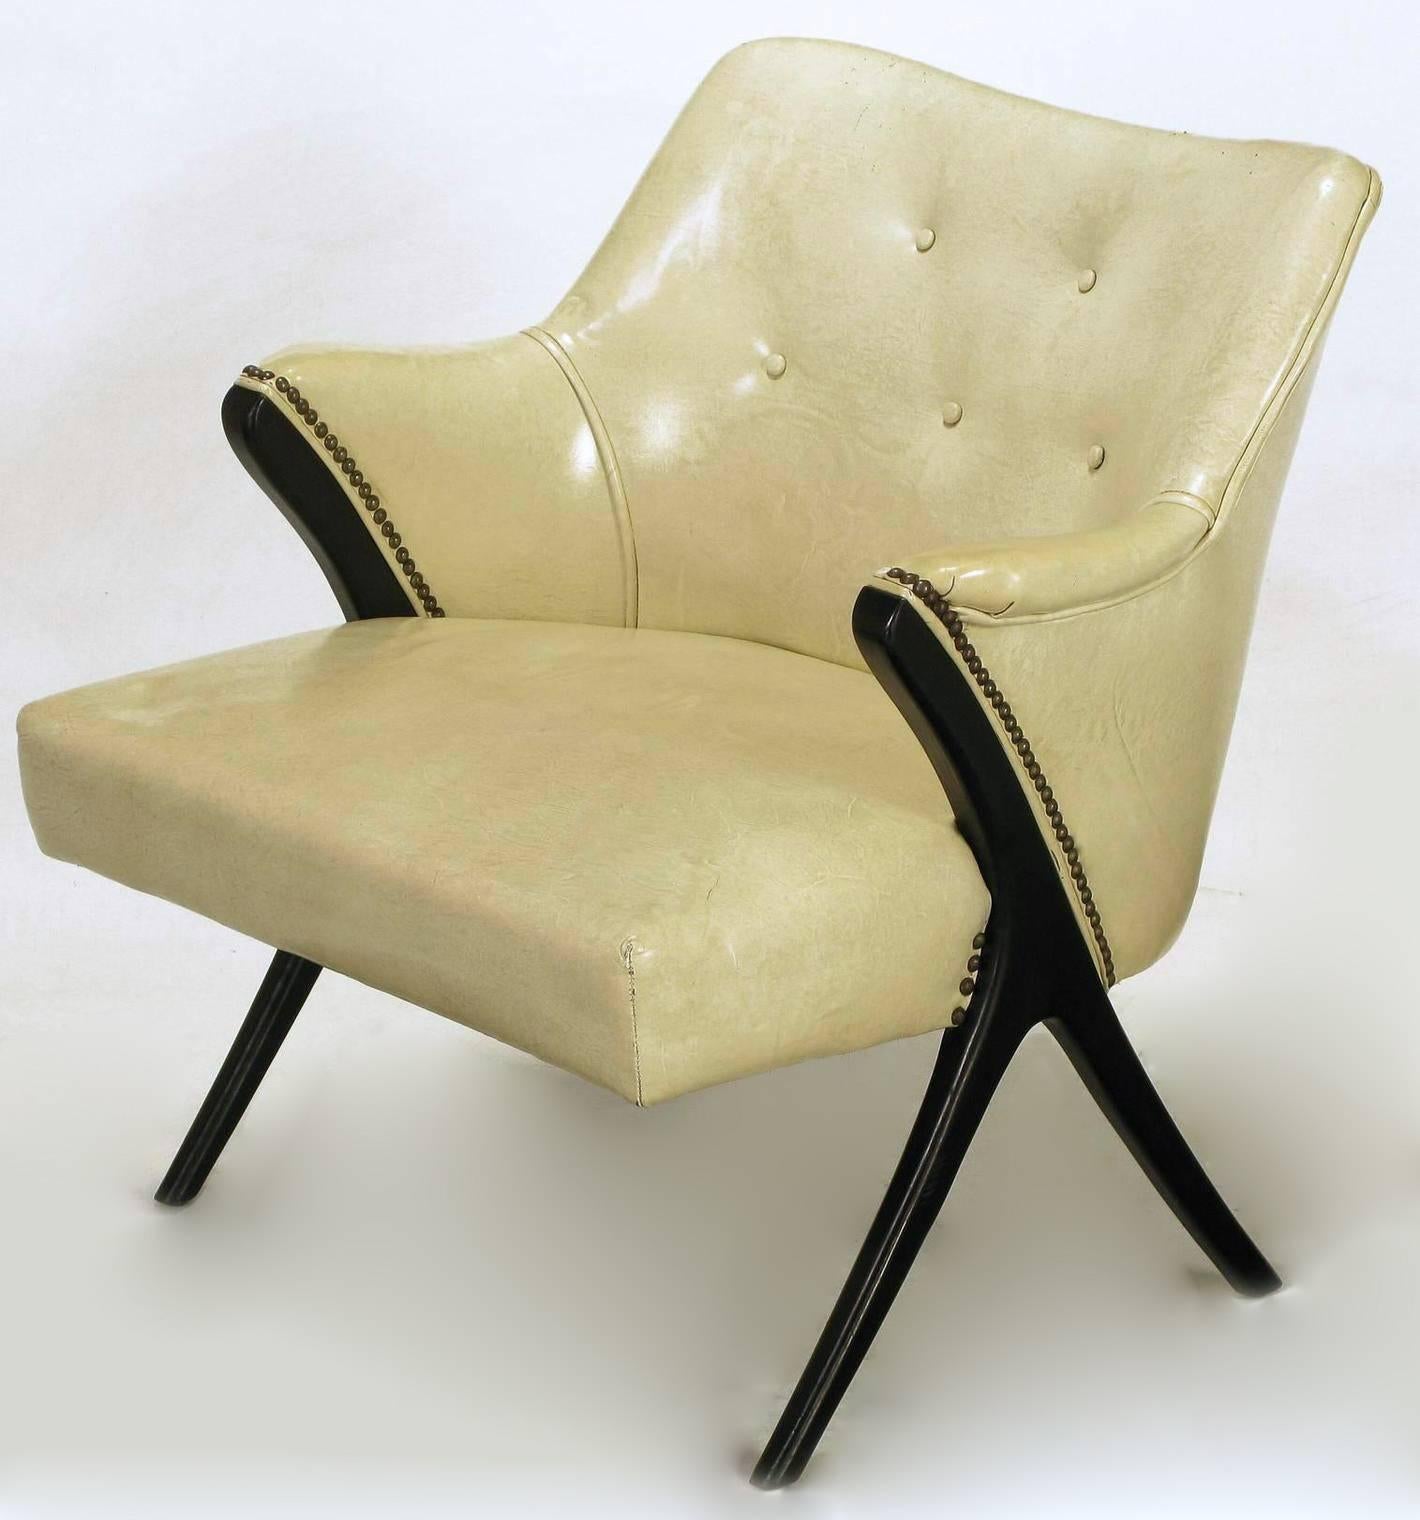 Pair of 1940s Modernist Club Chairs in Original Bone Glazed Leather In Good Condition For Sale In Chicago, IL